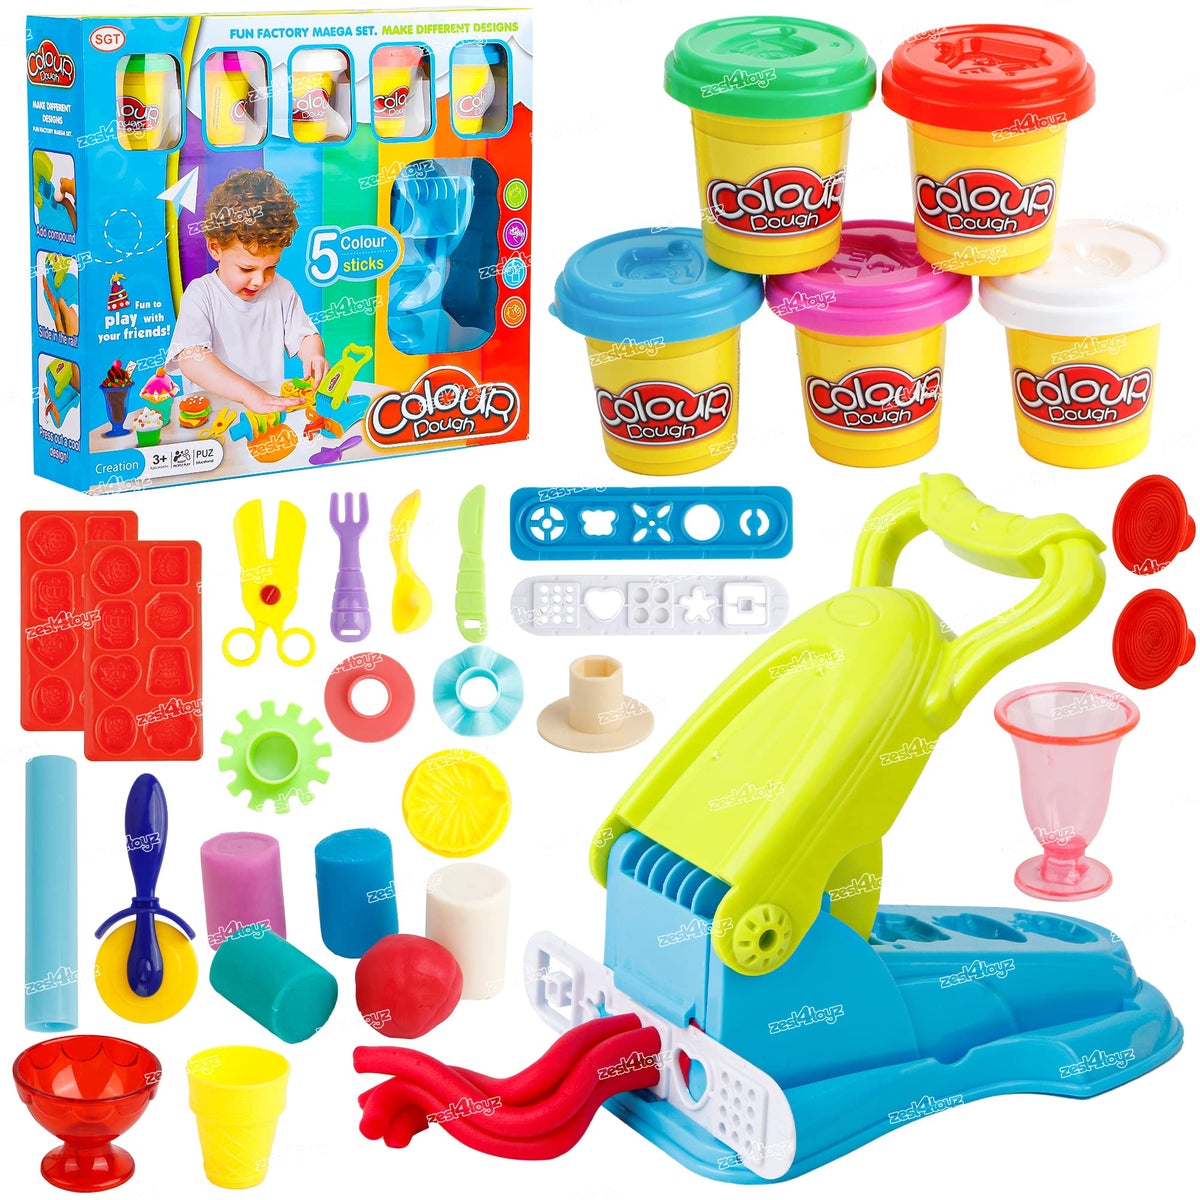 Zest 4 Toyz Clay Dough for Kids Clay for Art and Craft for Kids Pretend Play Activity Clay Toys Tools (28 Pieces) for 3 + Years (Multicolor)